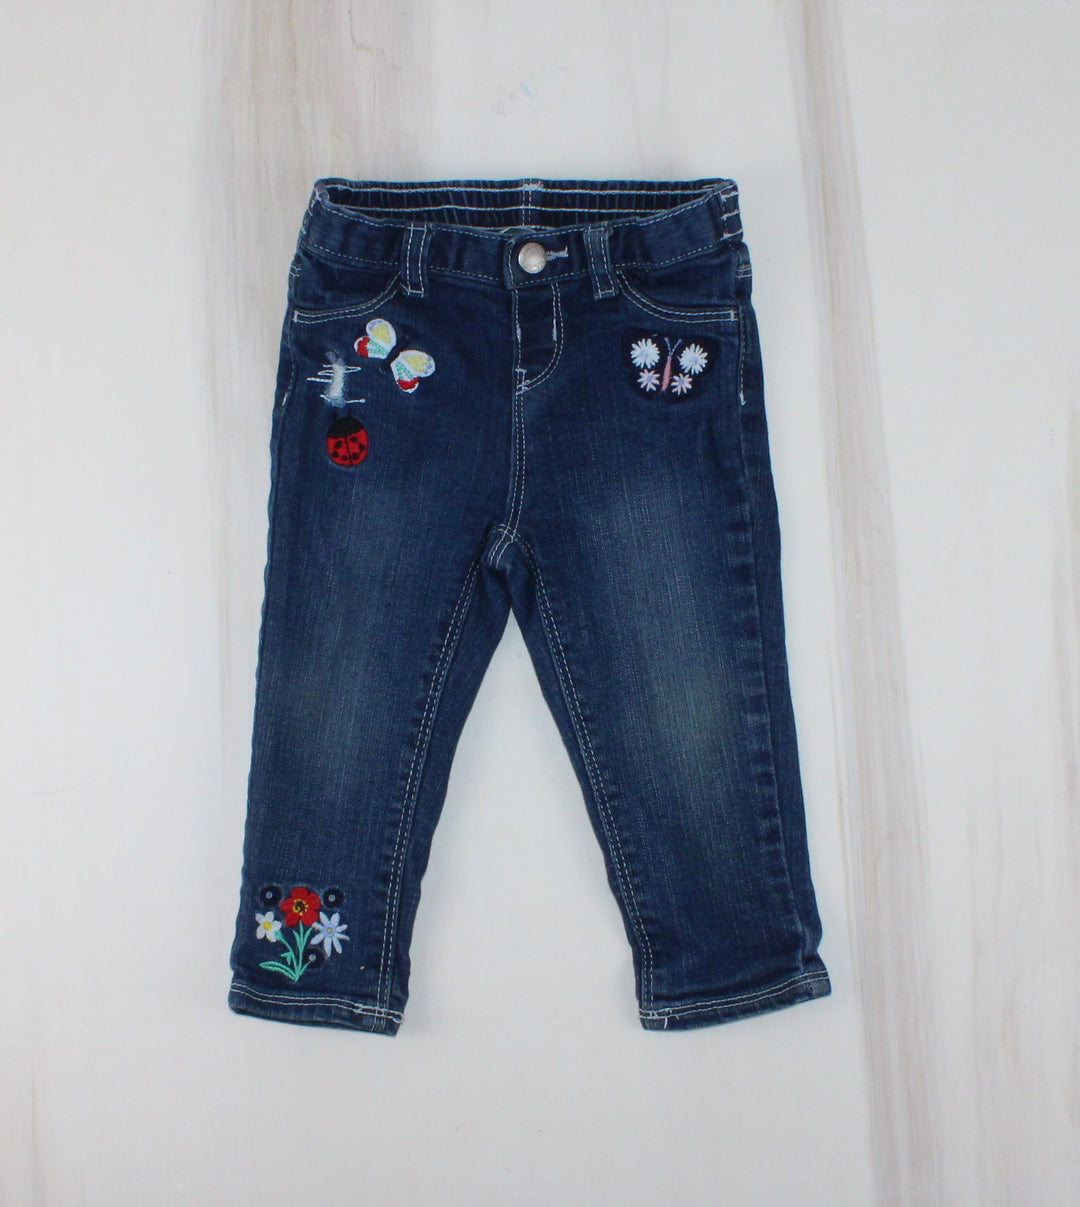 KOALA KIDS JEANS WITH EMBROIDERY DESIGNS 9-12M VGUC